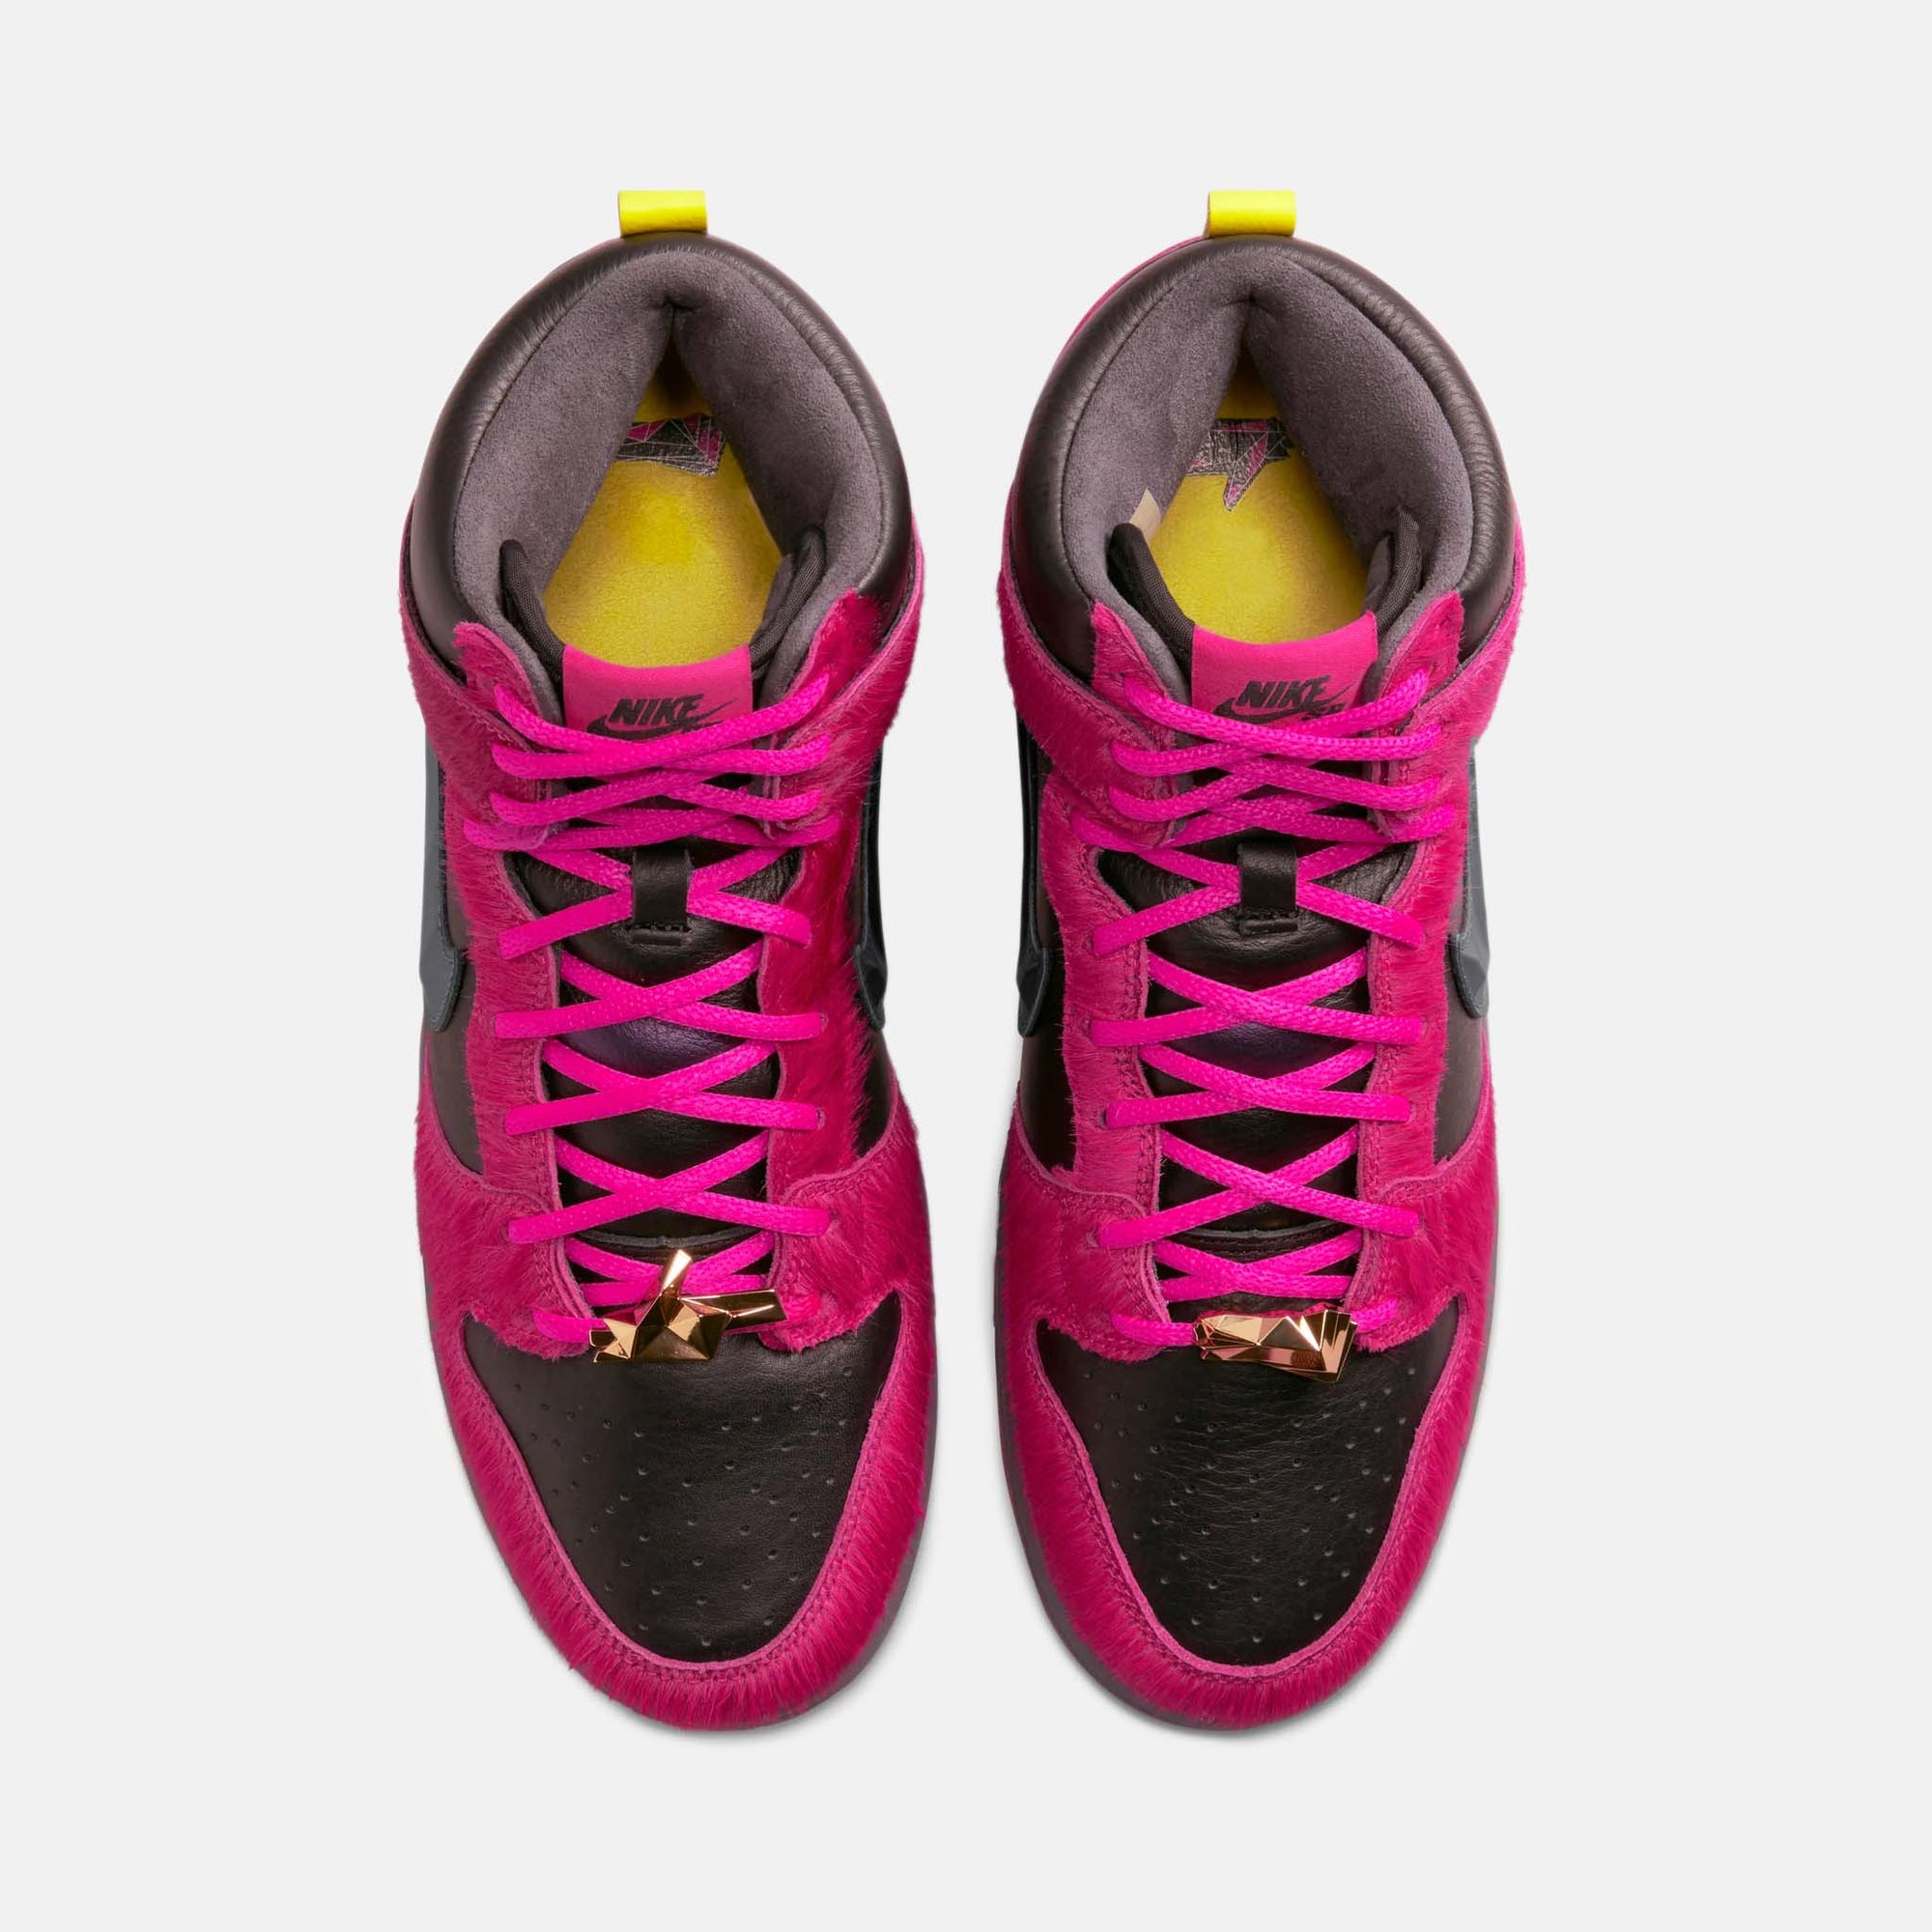 Nike SB - Run The Jewels Dunk High Pro Shoes (UK ONLY) - Active Pink / Black